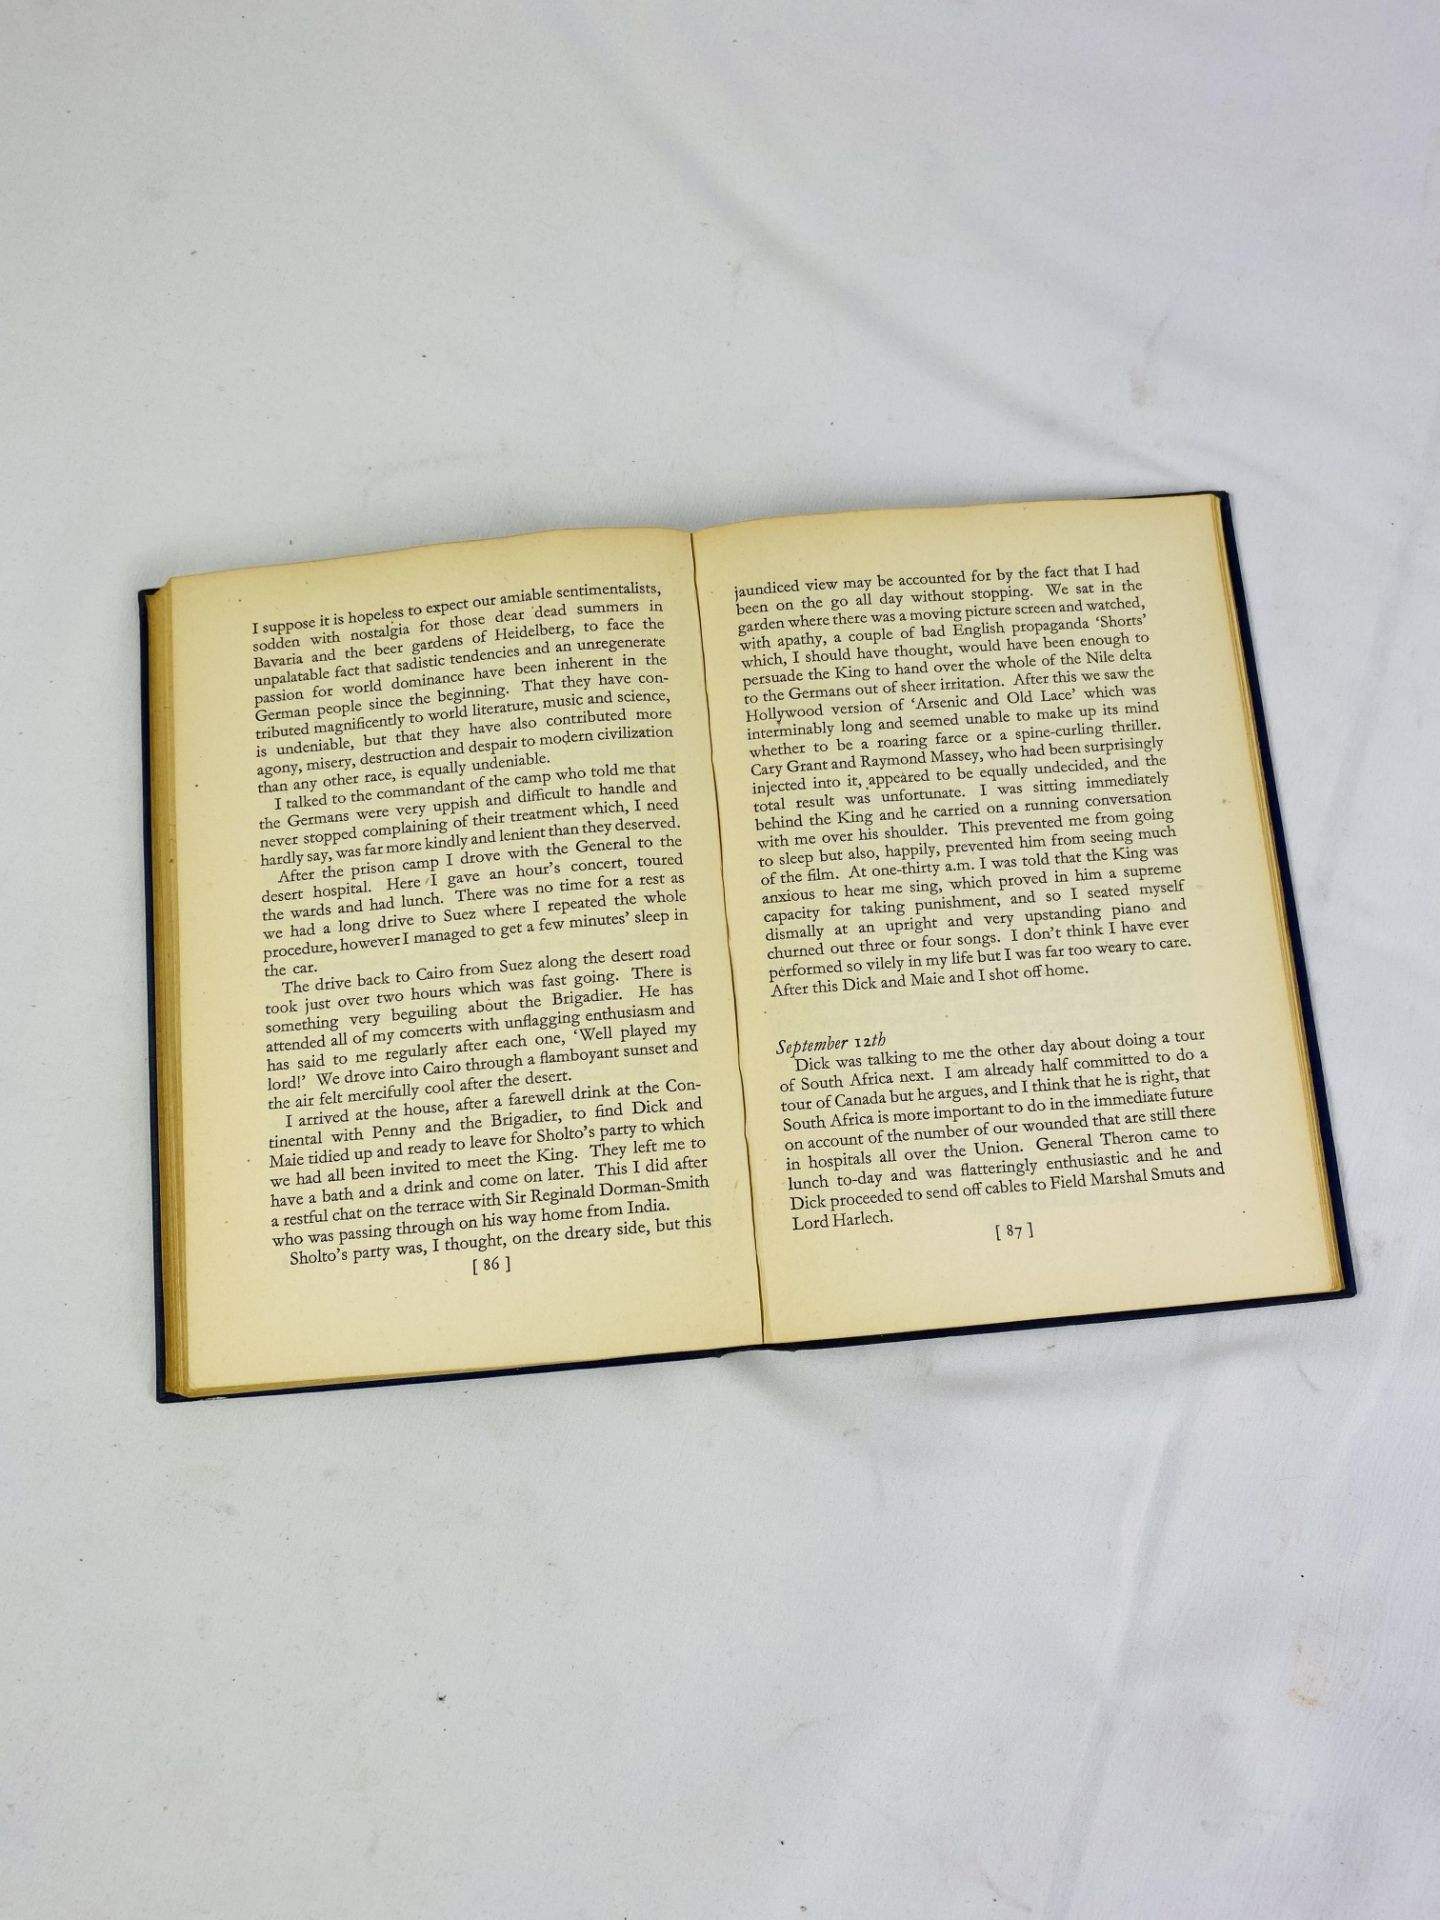 Noel Coward, Middle East Diary, first edition, William Heinemann Ltd, 1944 - Image 3 of 7